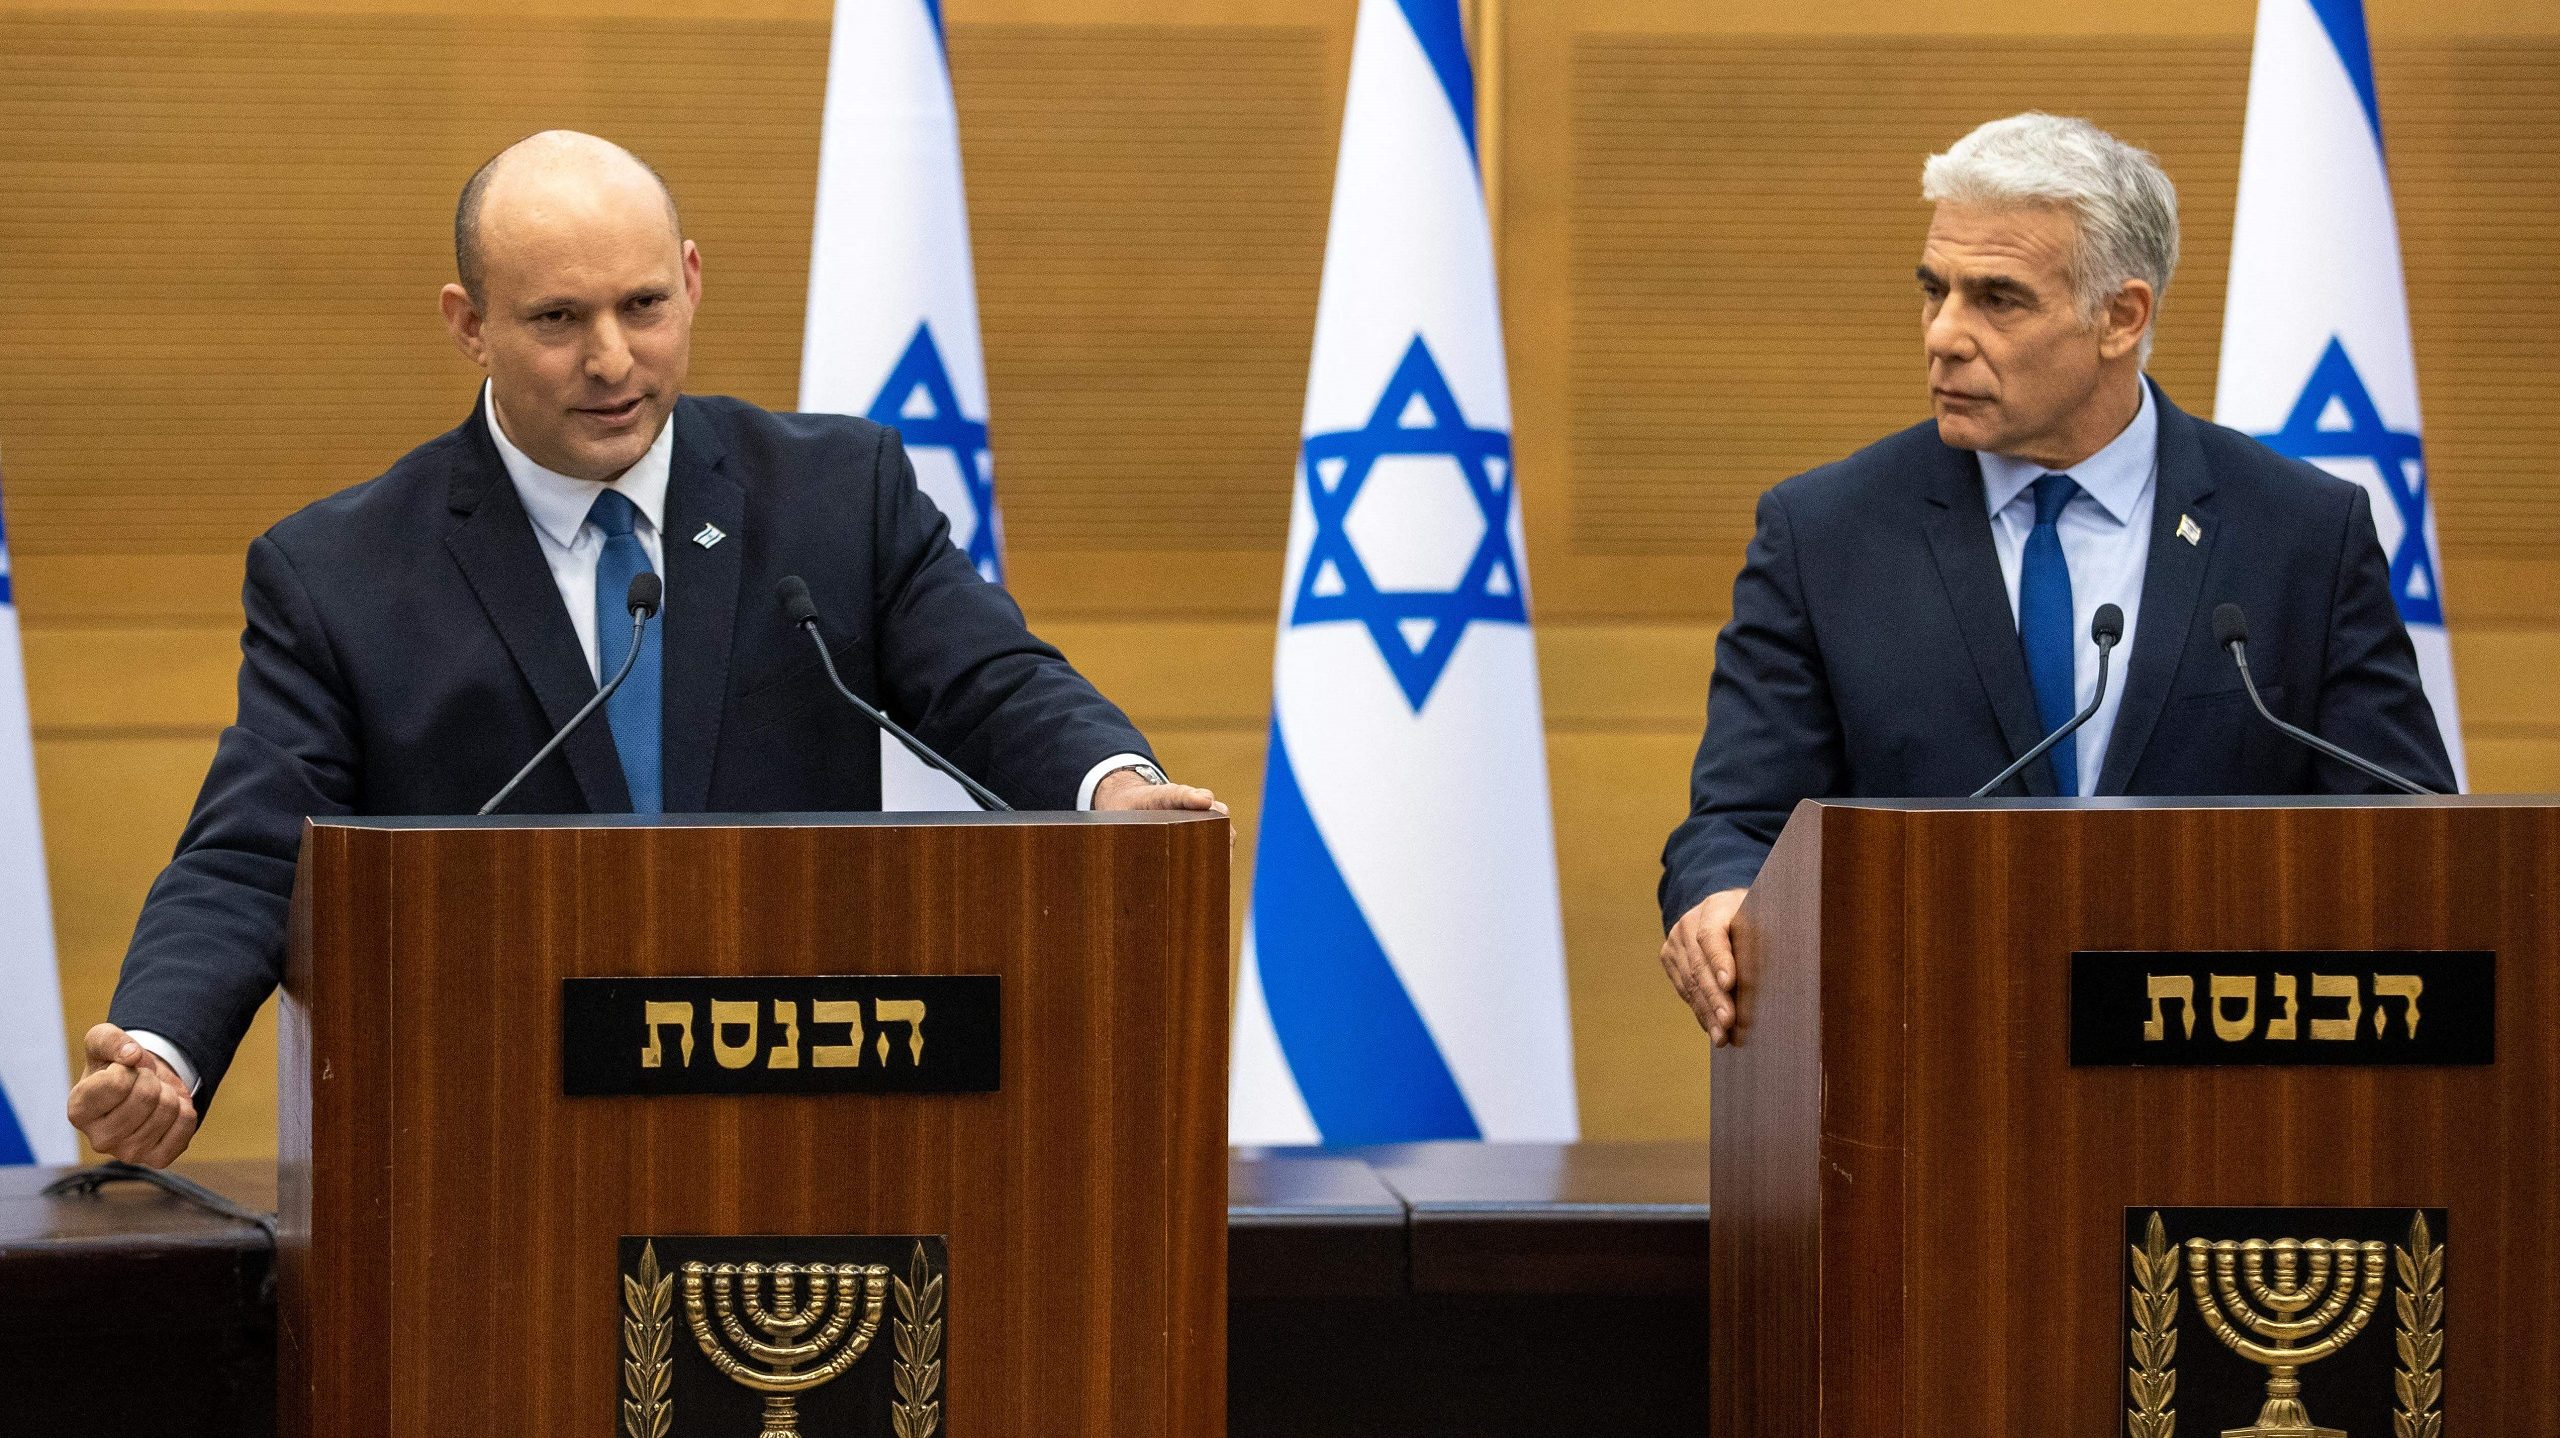 Beleaguered Israeli Gov’t To Pre-emptively Dissolve Knesset, Go to Elections